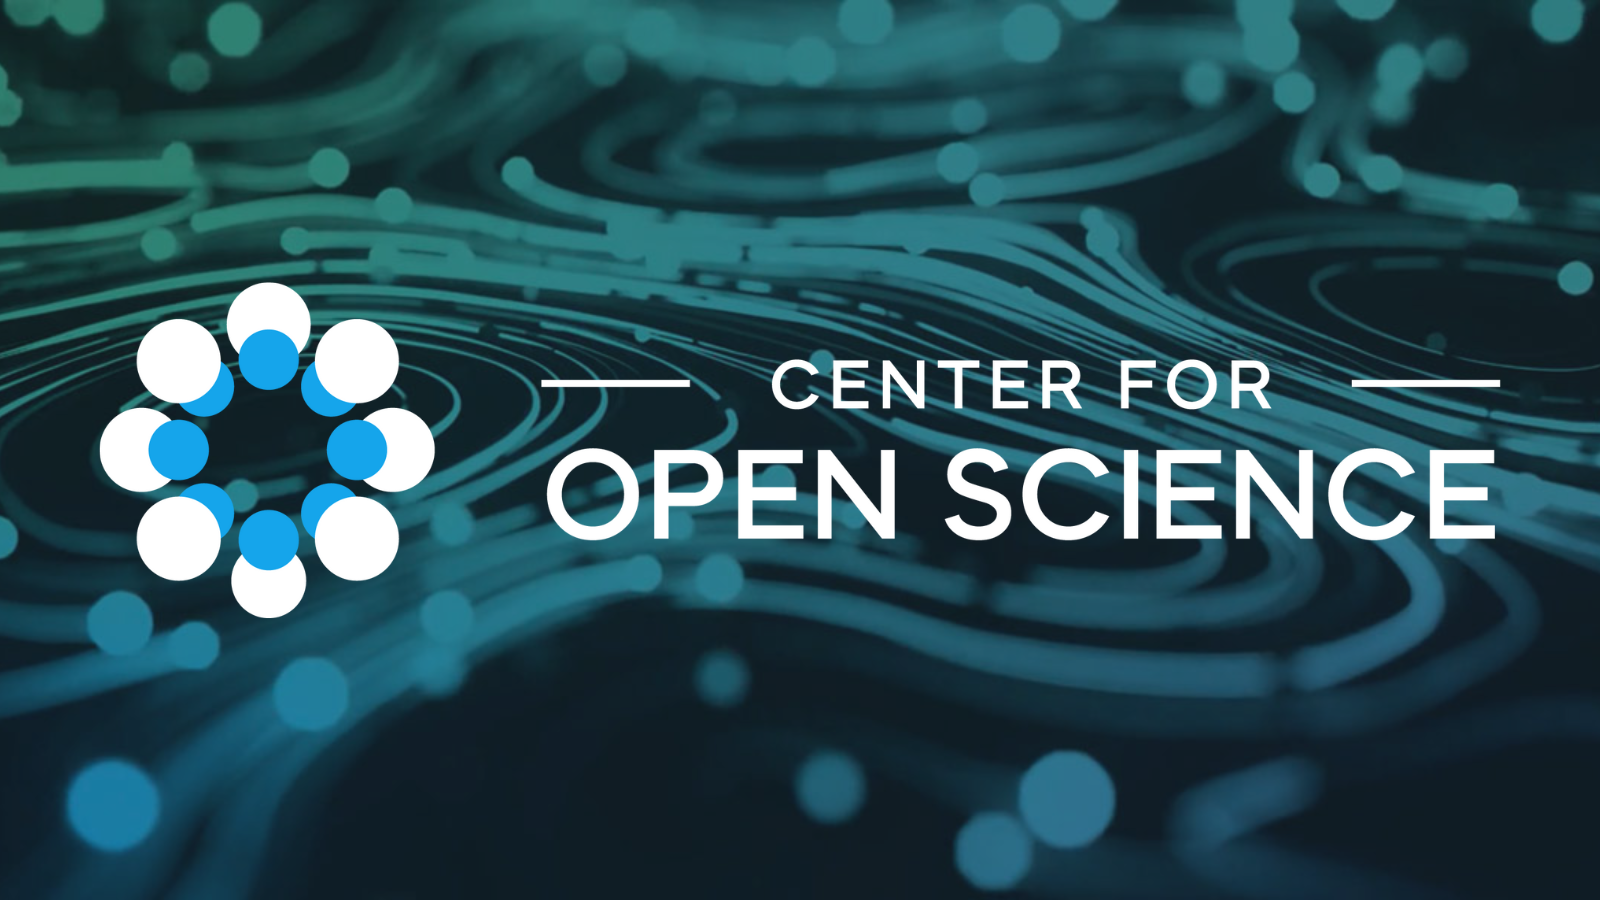 Blue/green background with Center for Open Science logo